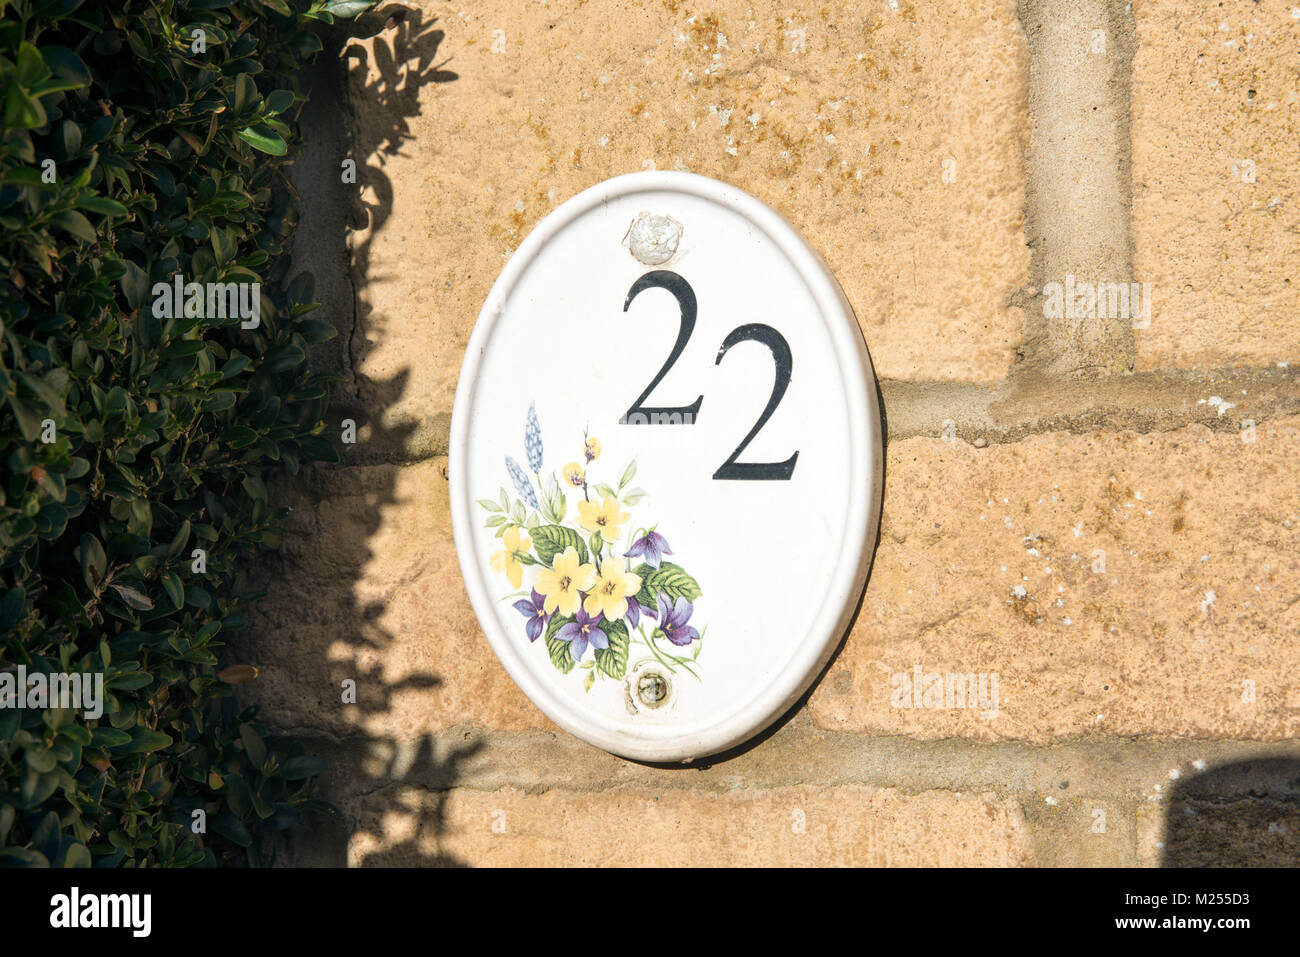 The number twenty two printed on a ceramic tile plaque on a home to show the properties address Stock Photo